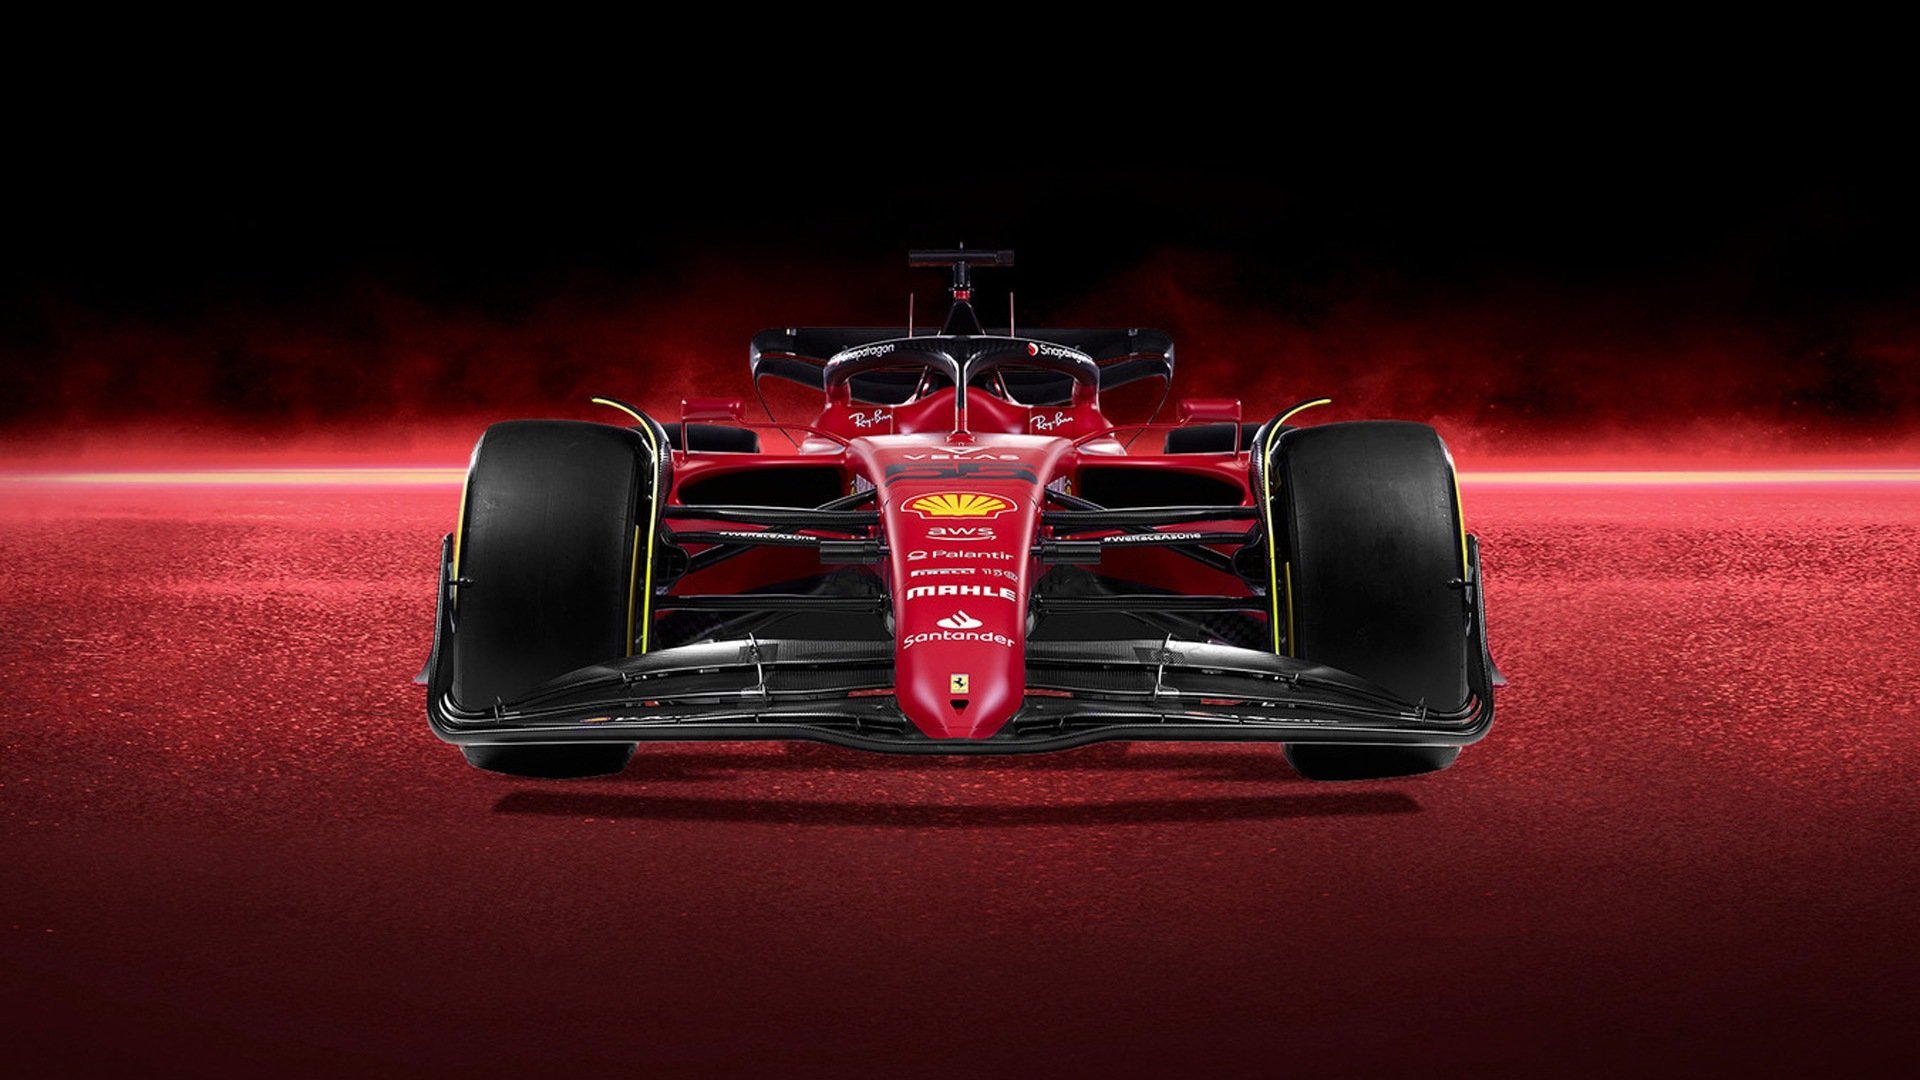 Ferrari steal the spotlight with their flashy 2022 F1 Livery